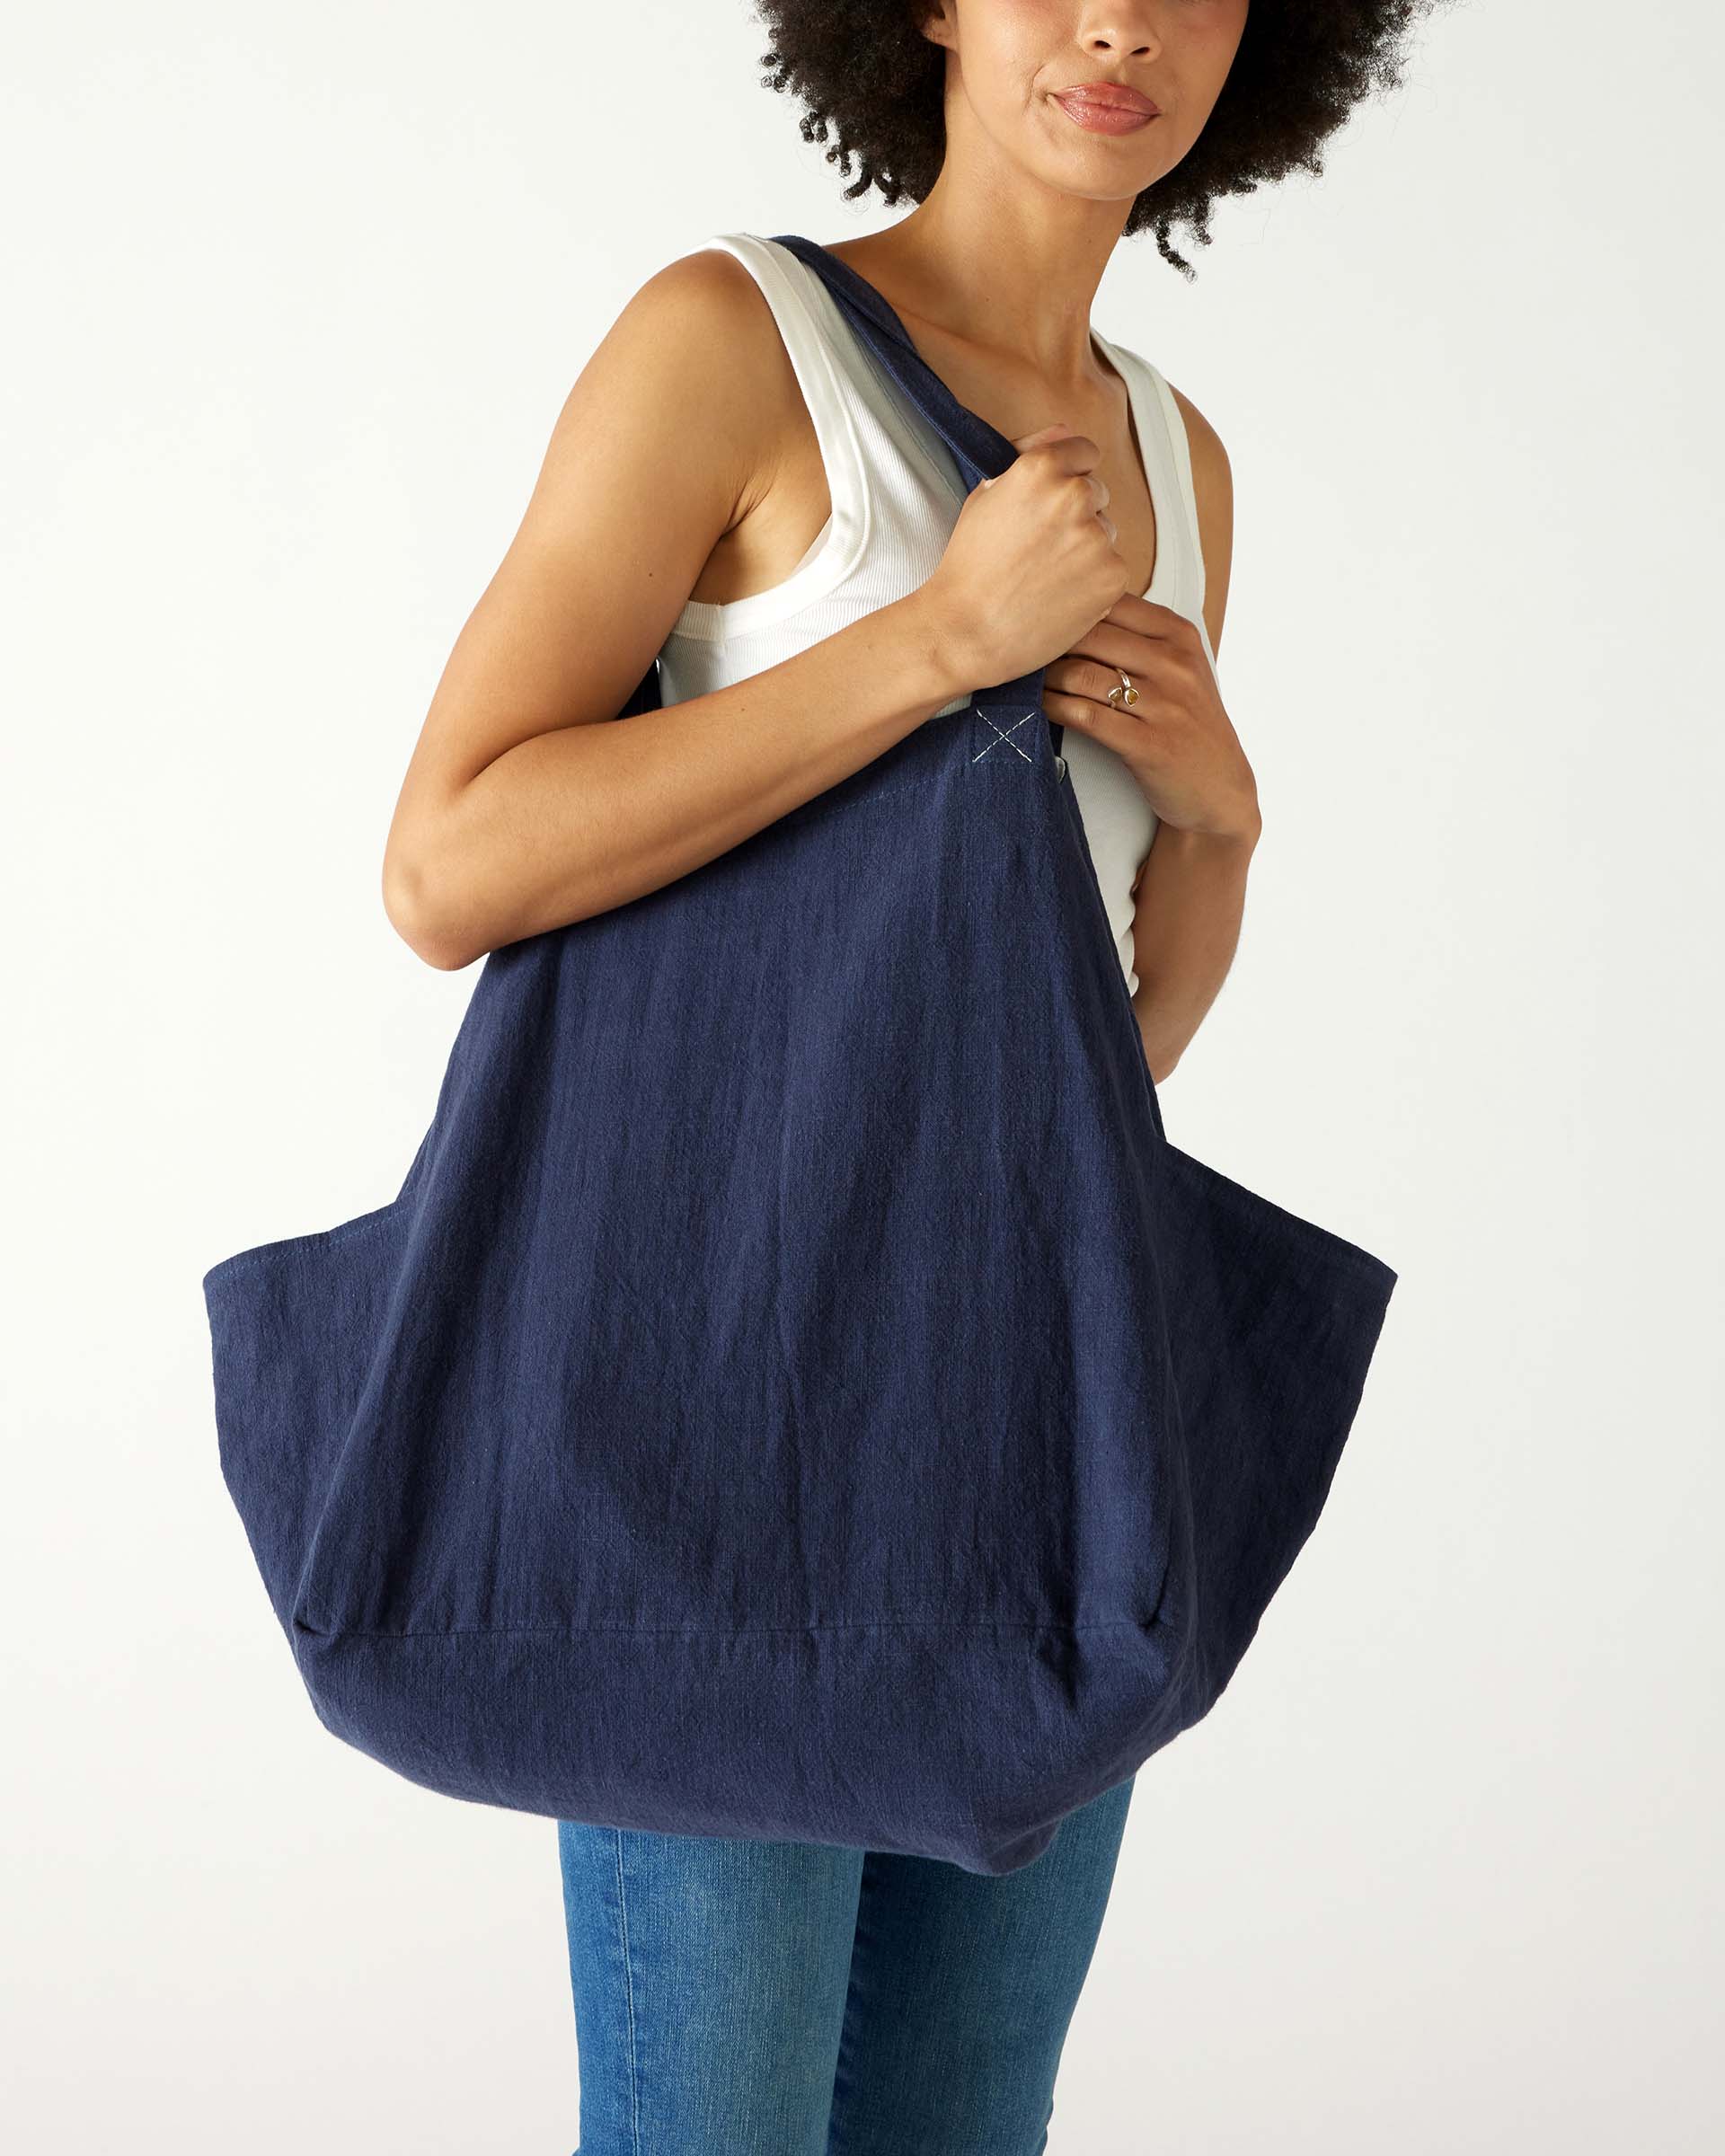 woman with mersea oversized canvas tote in navy blue over right shoulder